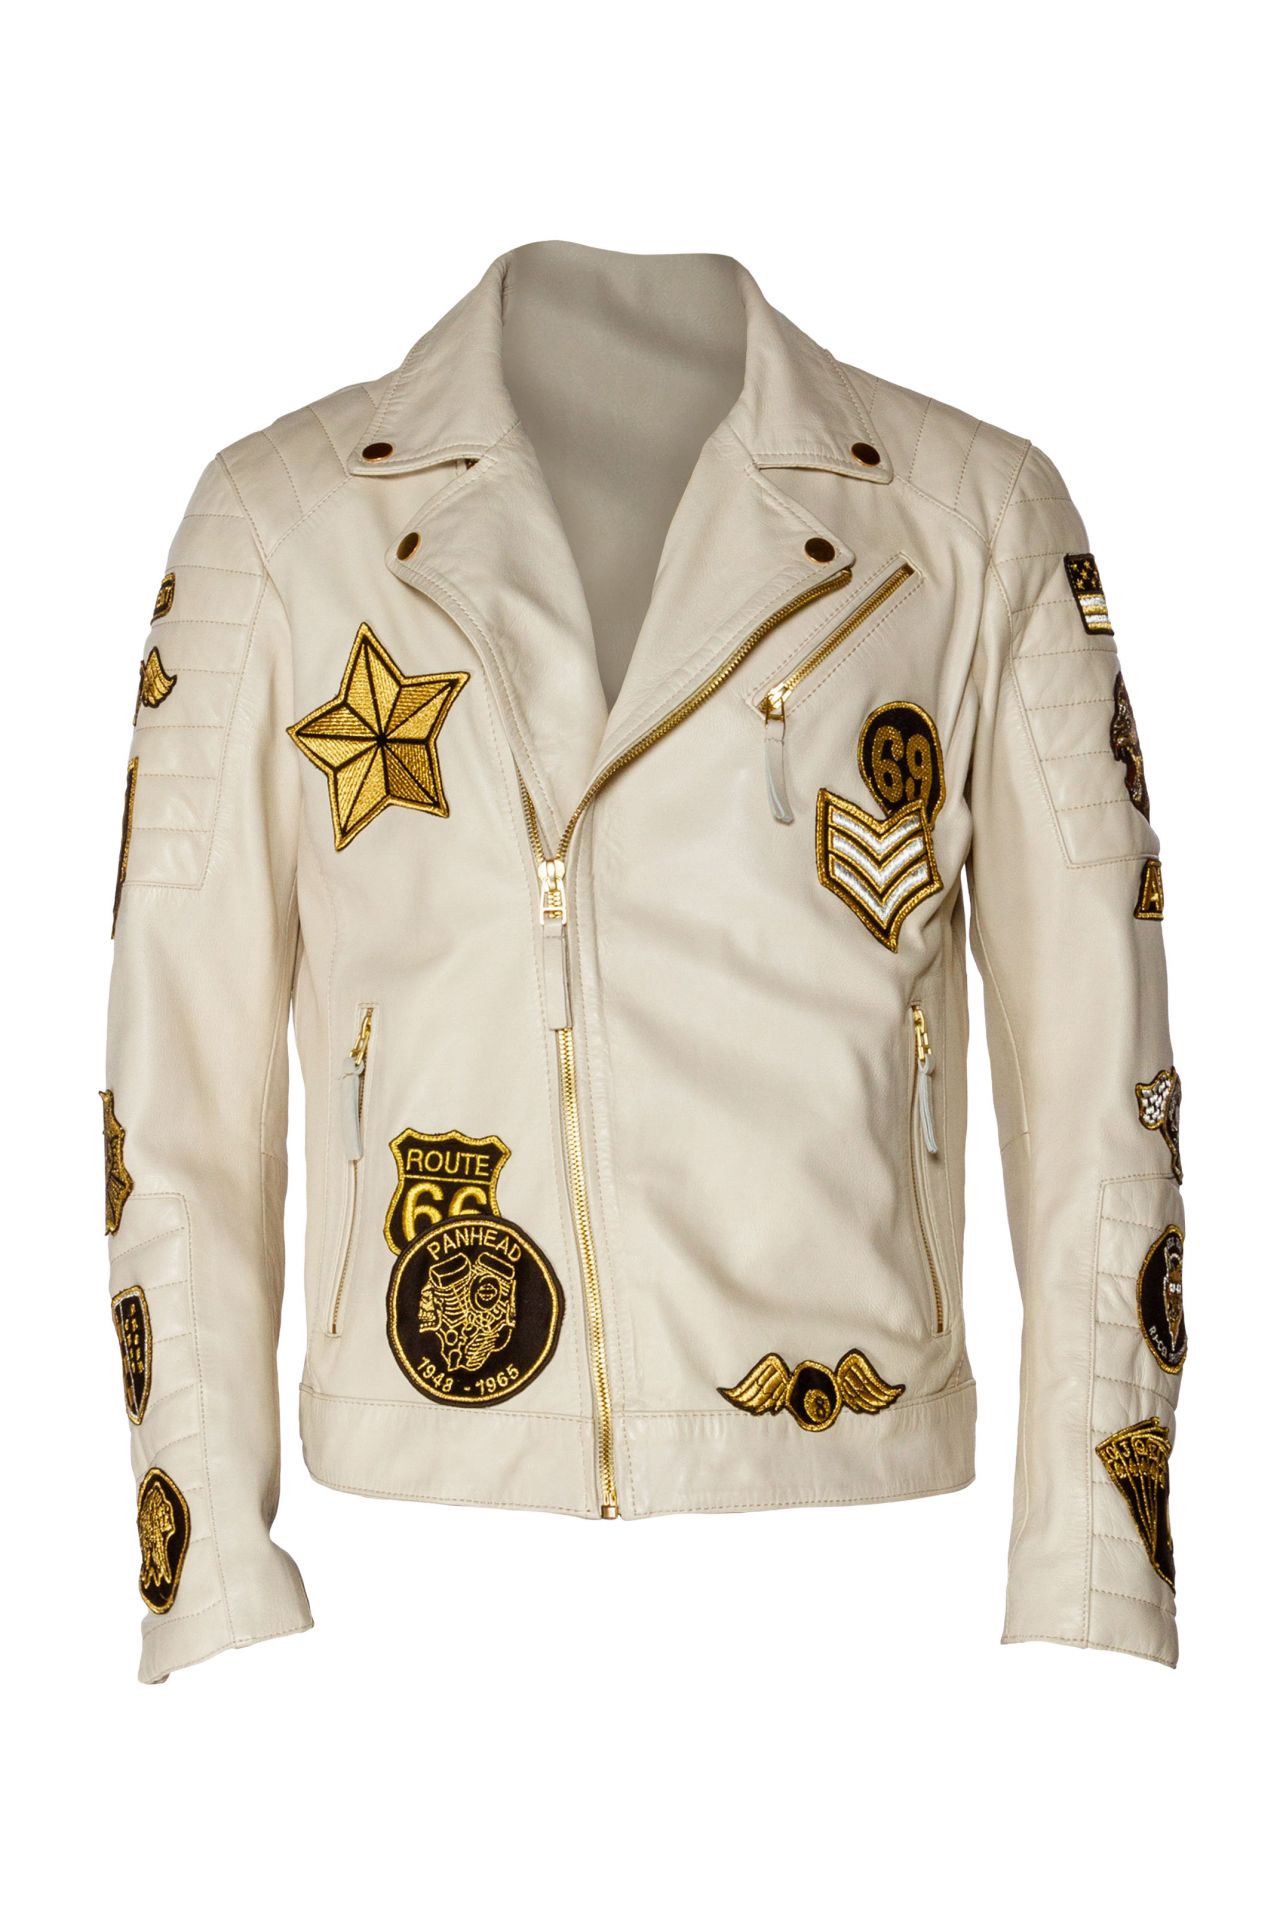 WHITE LEATHER BIKER JACKET WITH PATCHWORK